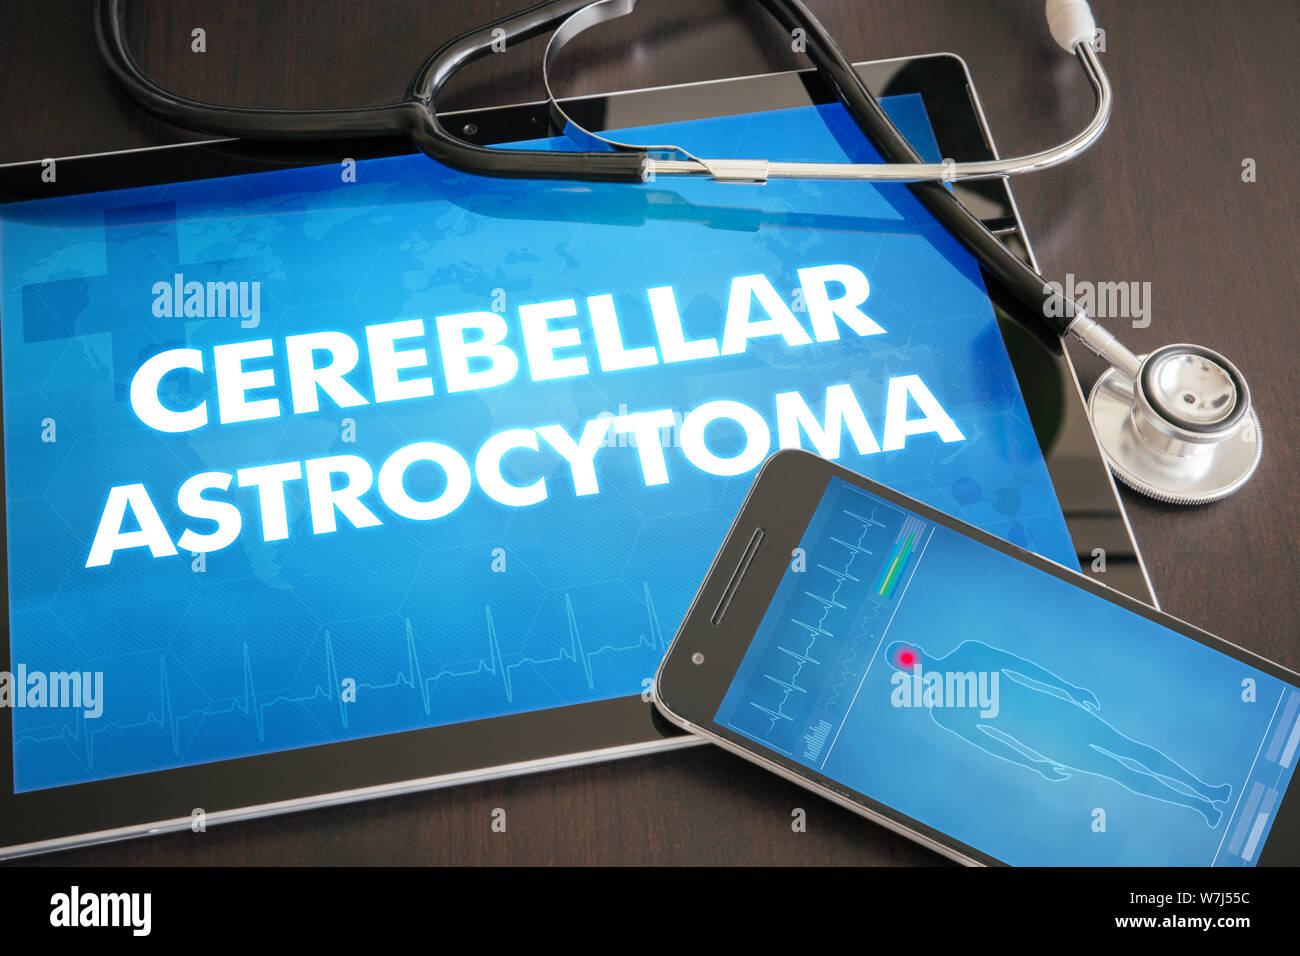 Cerebellar astrocytoma (cancer type) diagnosis medical concept on tablet screen with stethoscope. Stock Photo